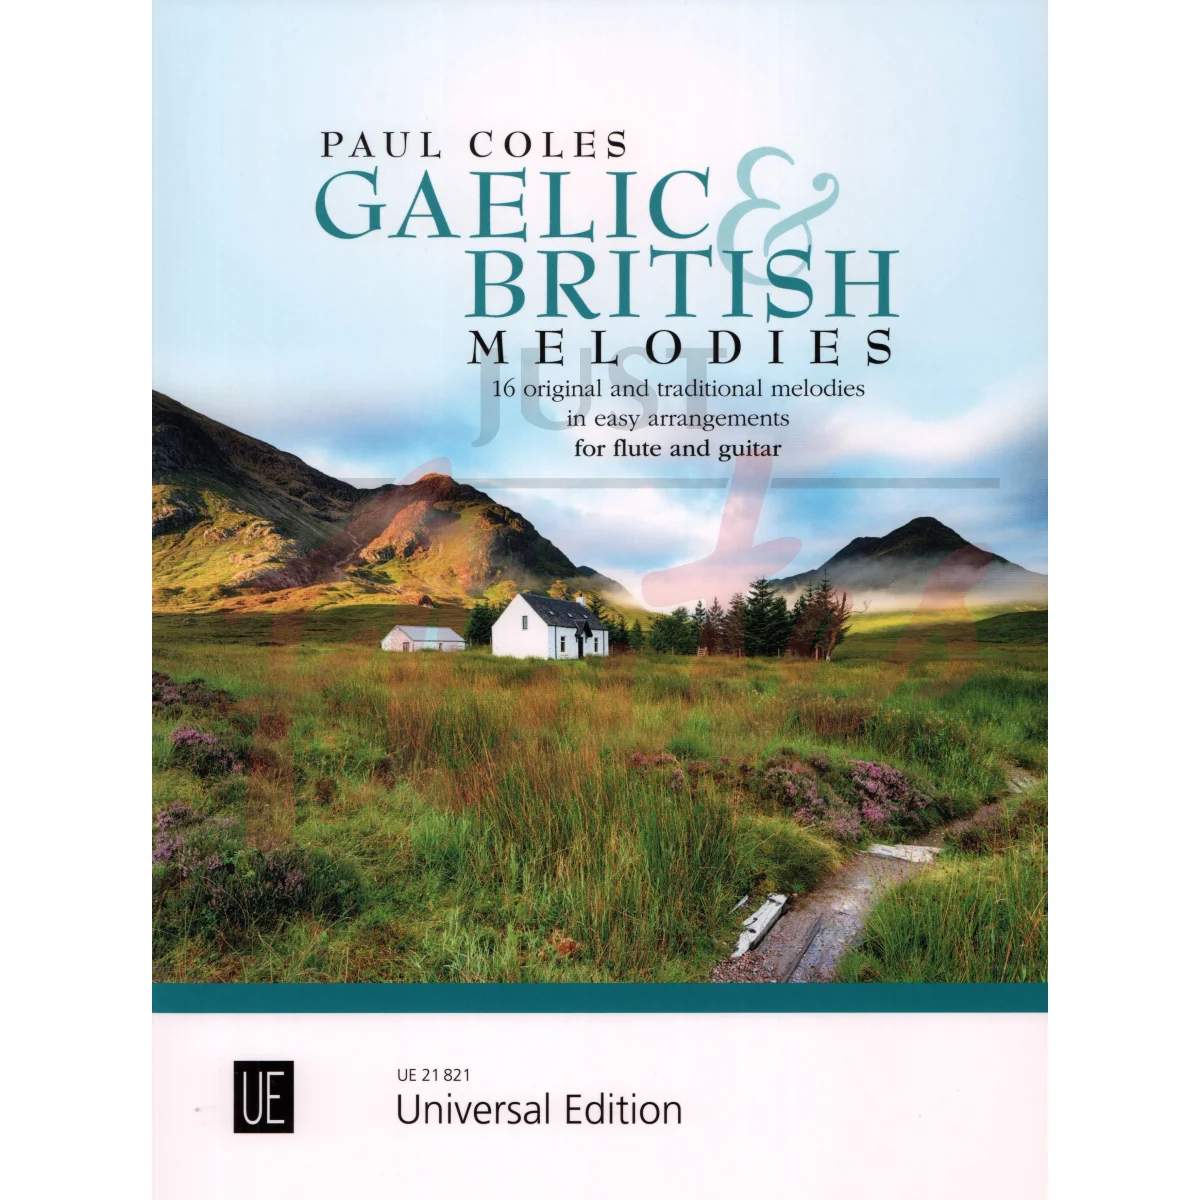 Gaelic &amp; British Melodies for Flute and Guitar